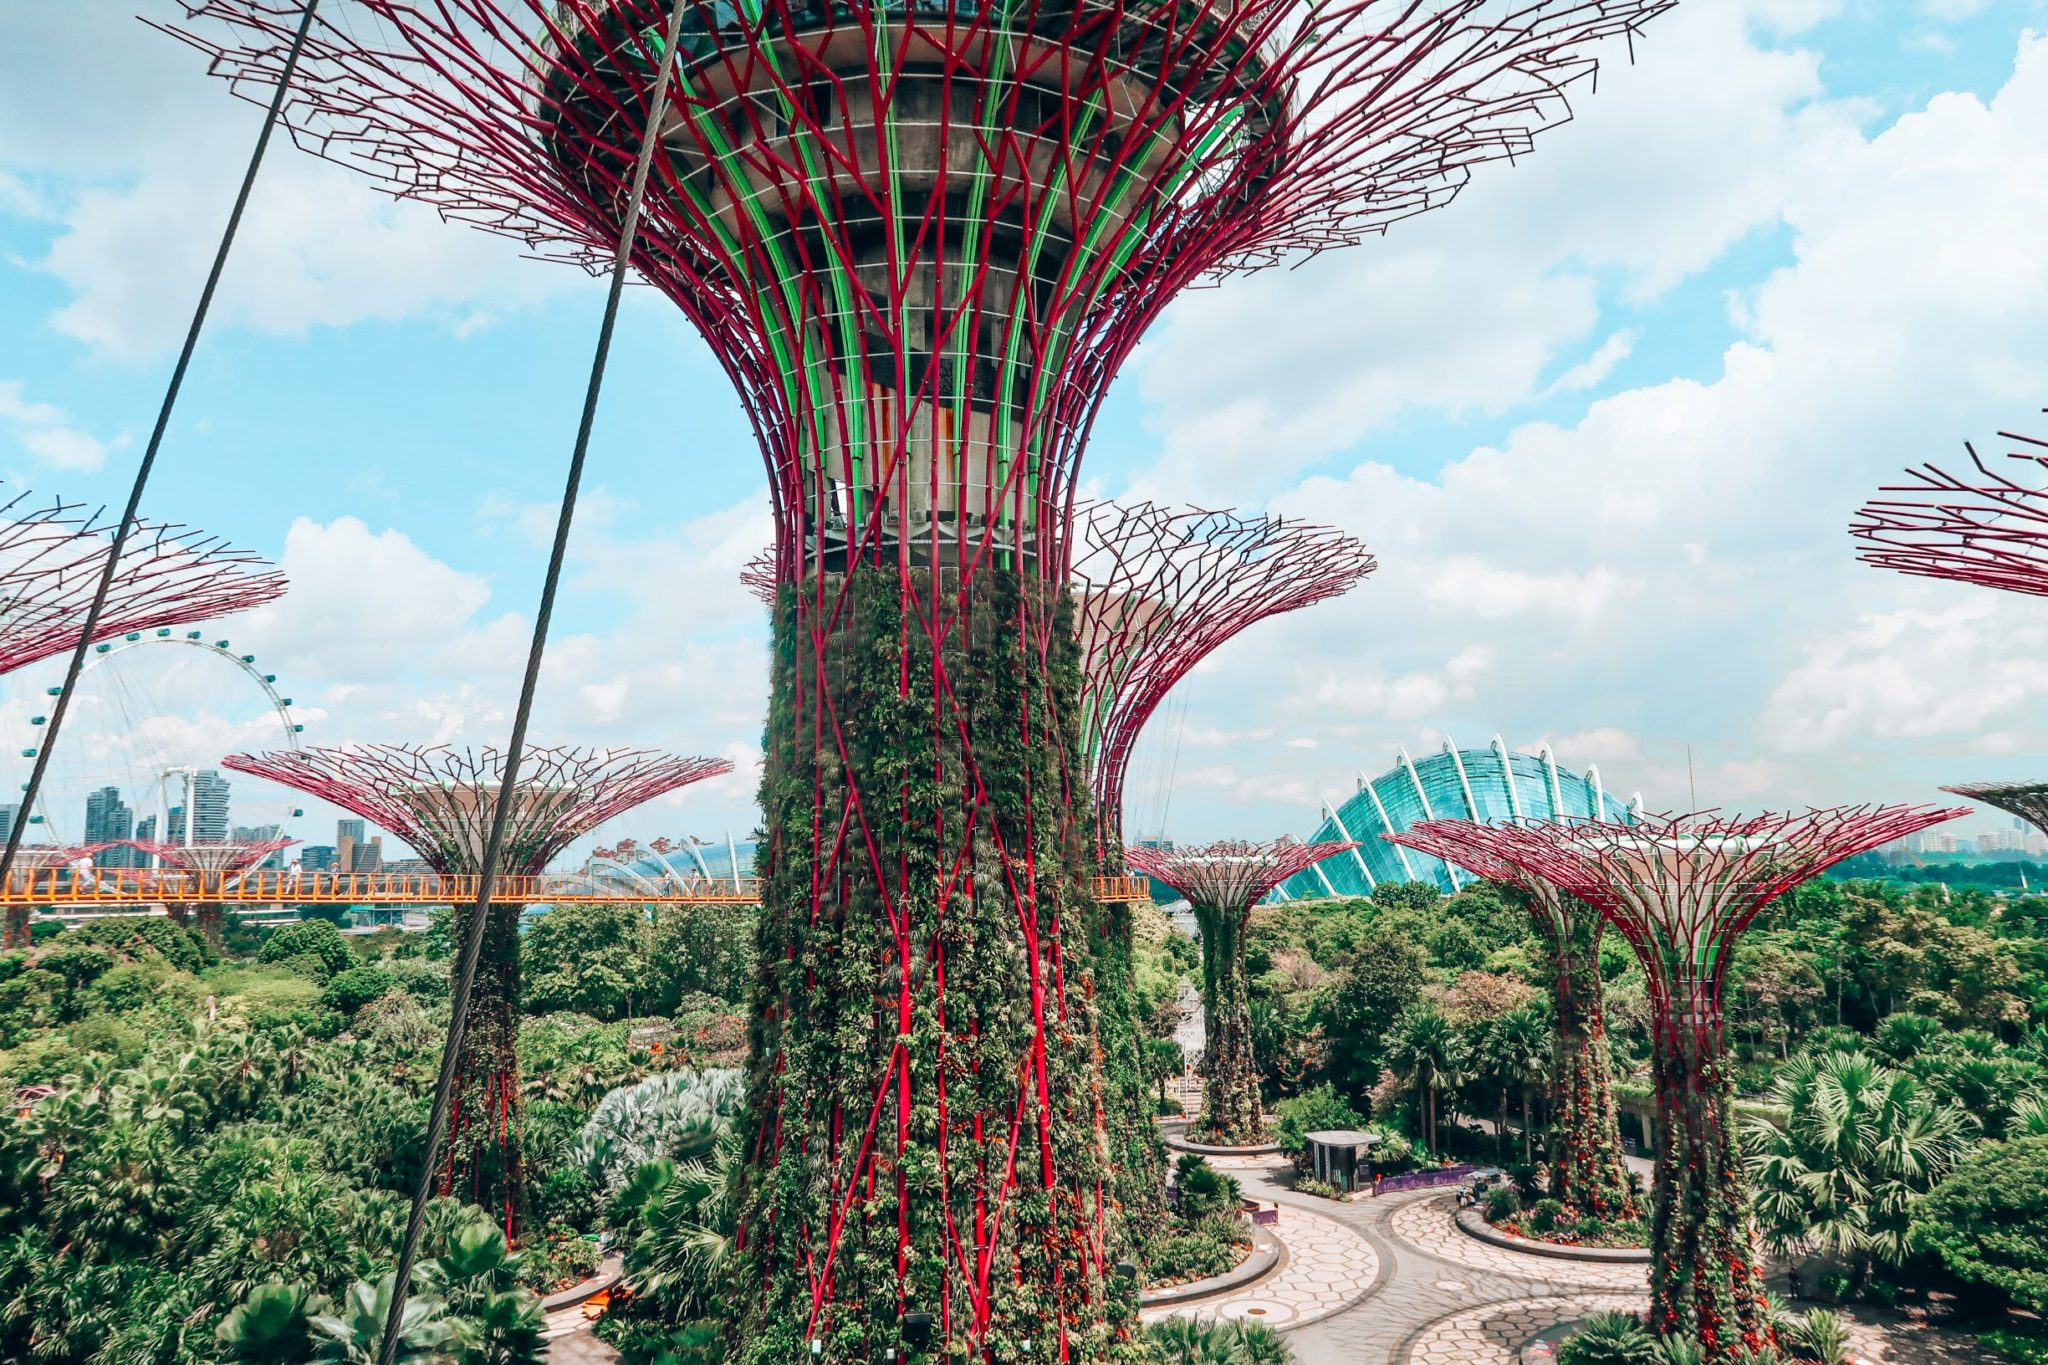 Visiting the Gardens by the Bay - from OCBC Skyway 